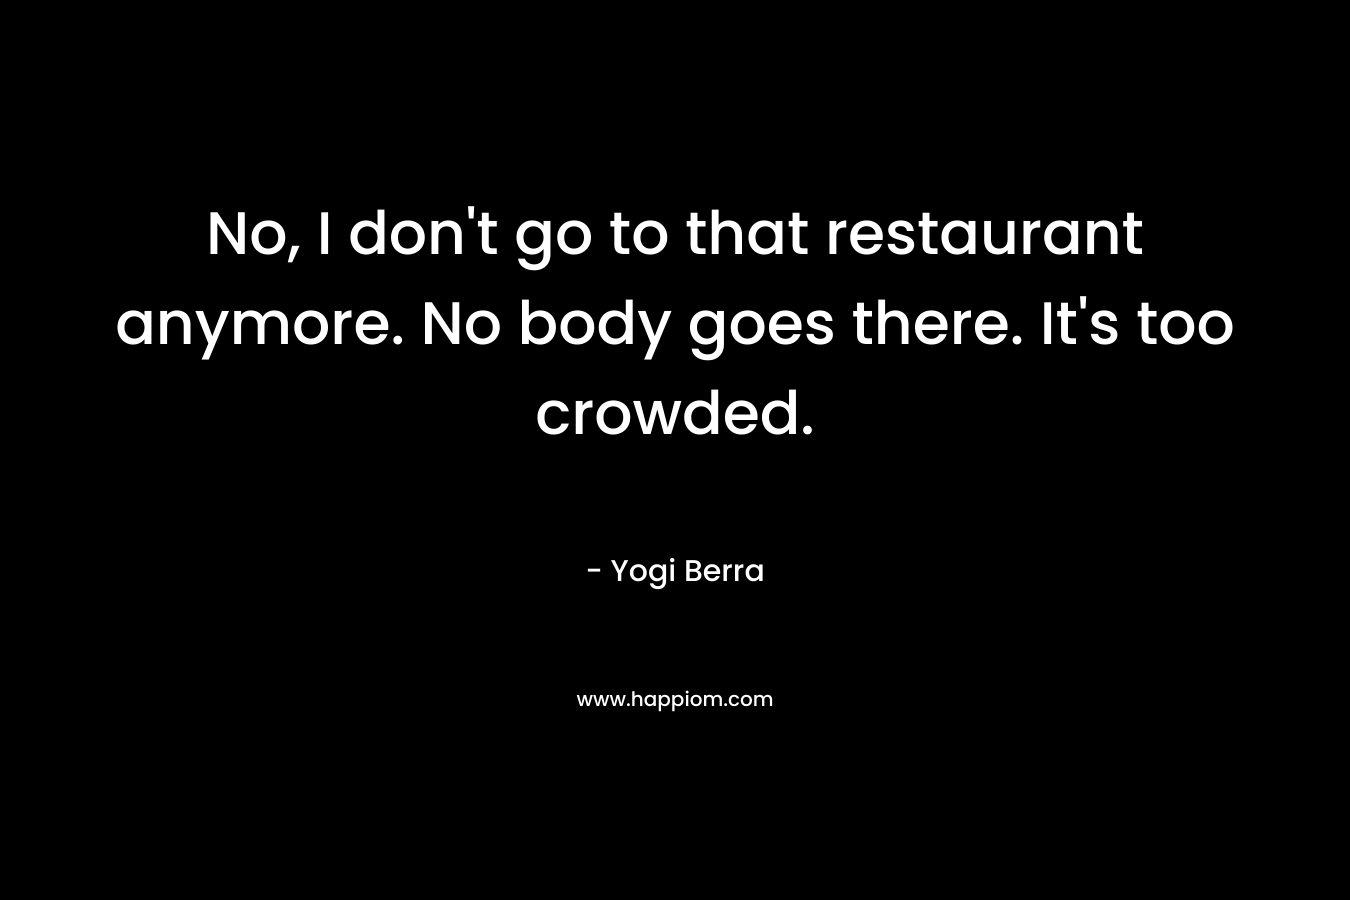 No, I don’t go to that restaurant anymore. No body goes there. It’s too crowded. – Yogi Berra